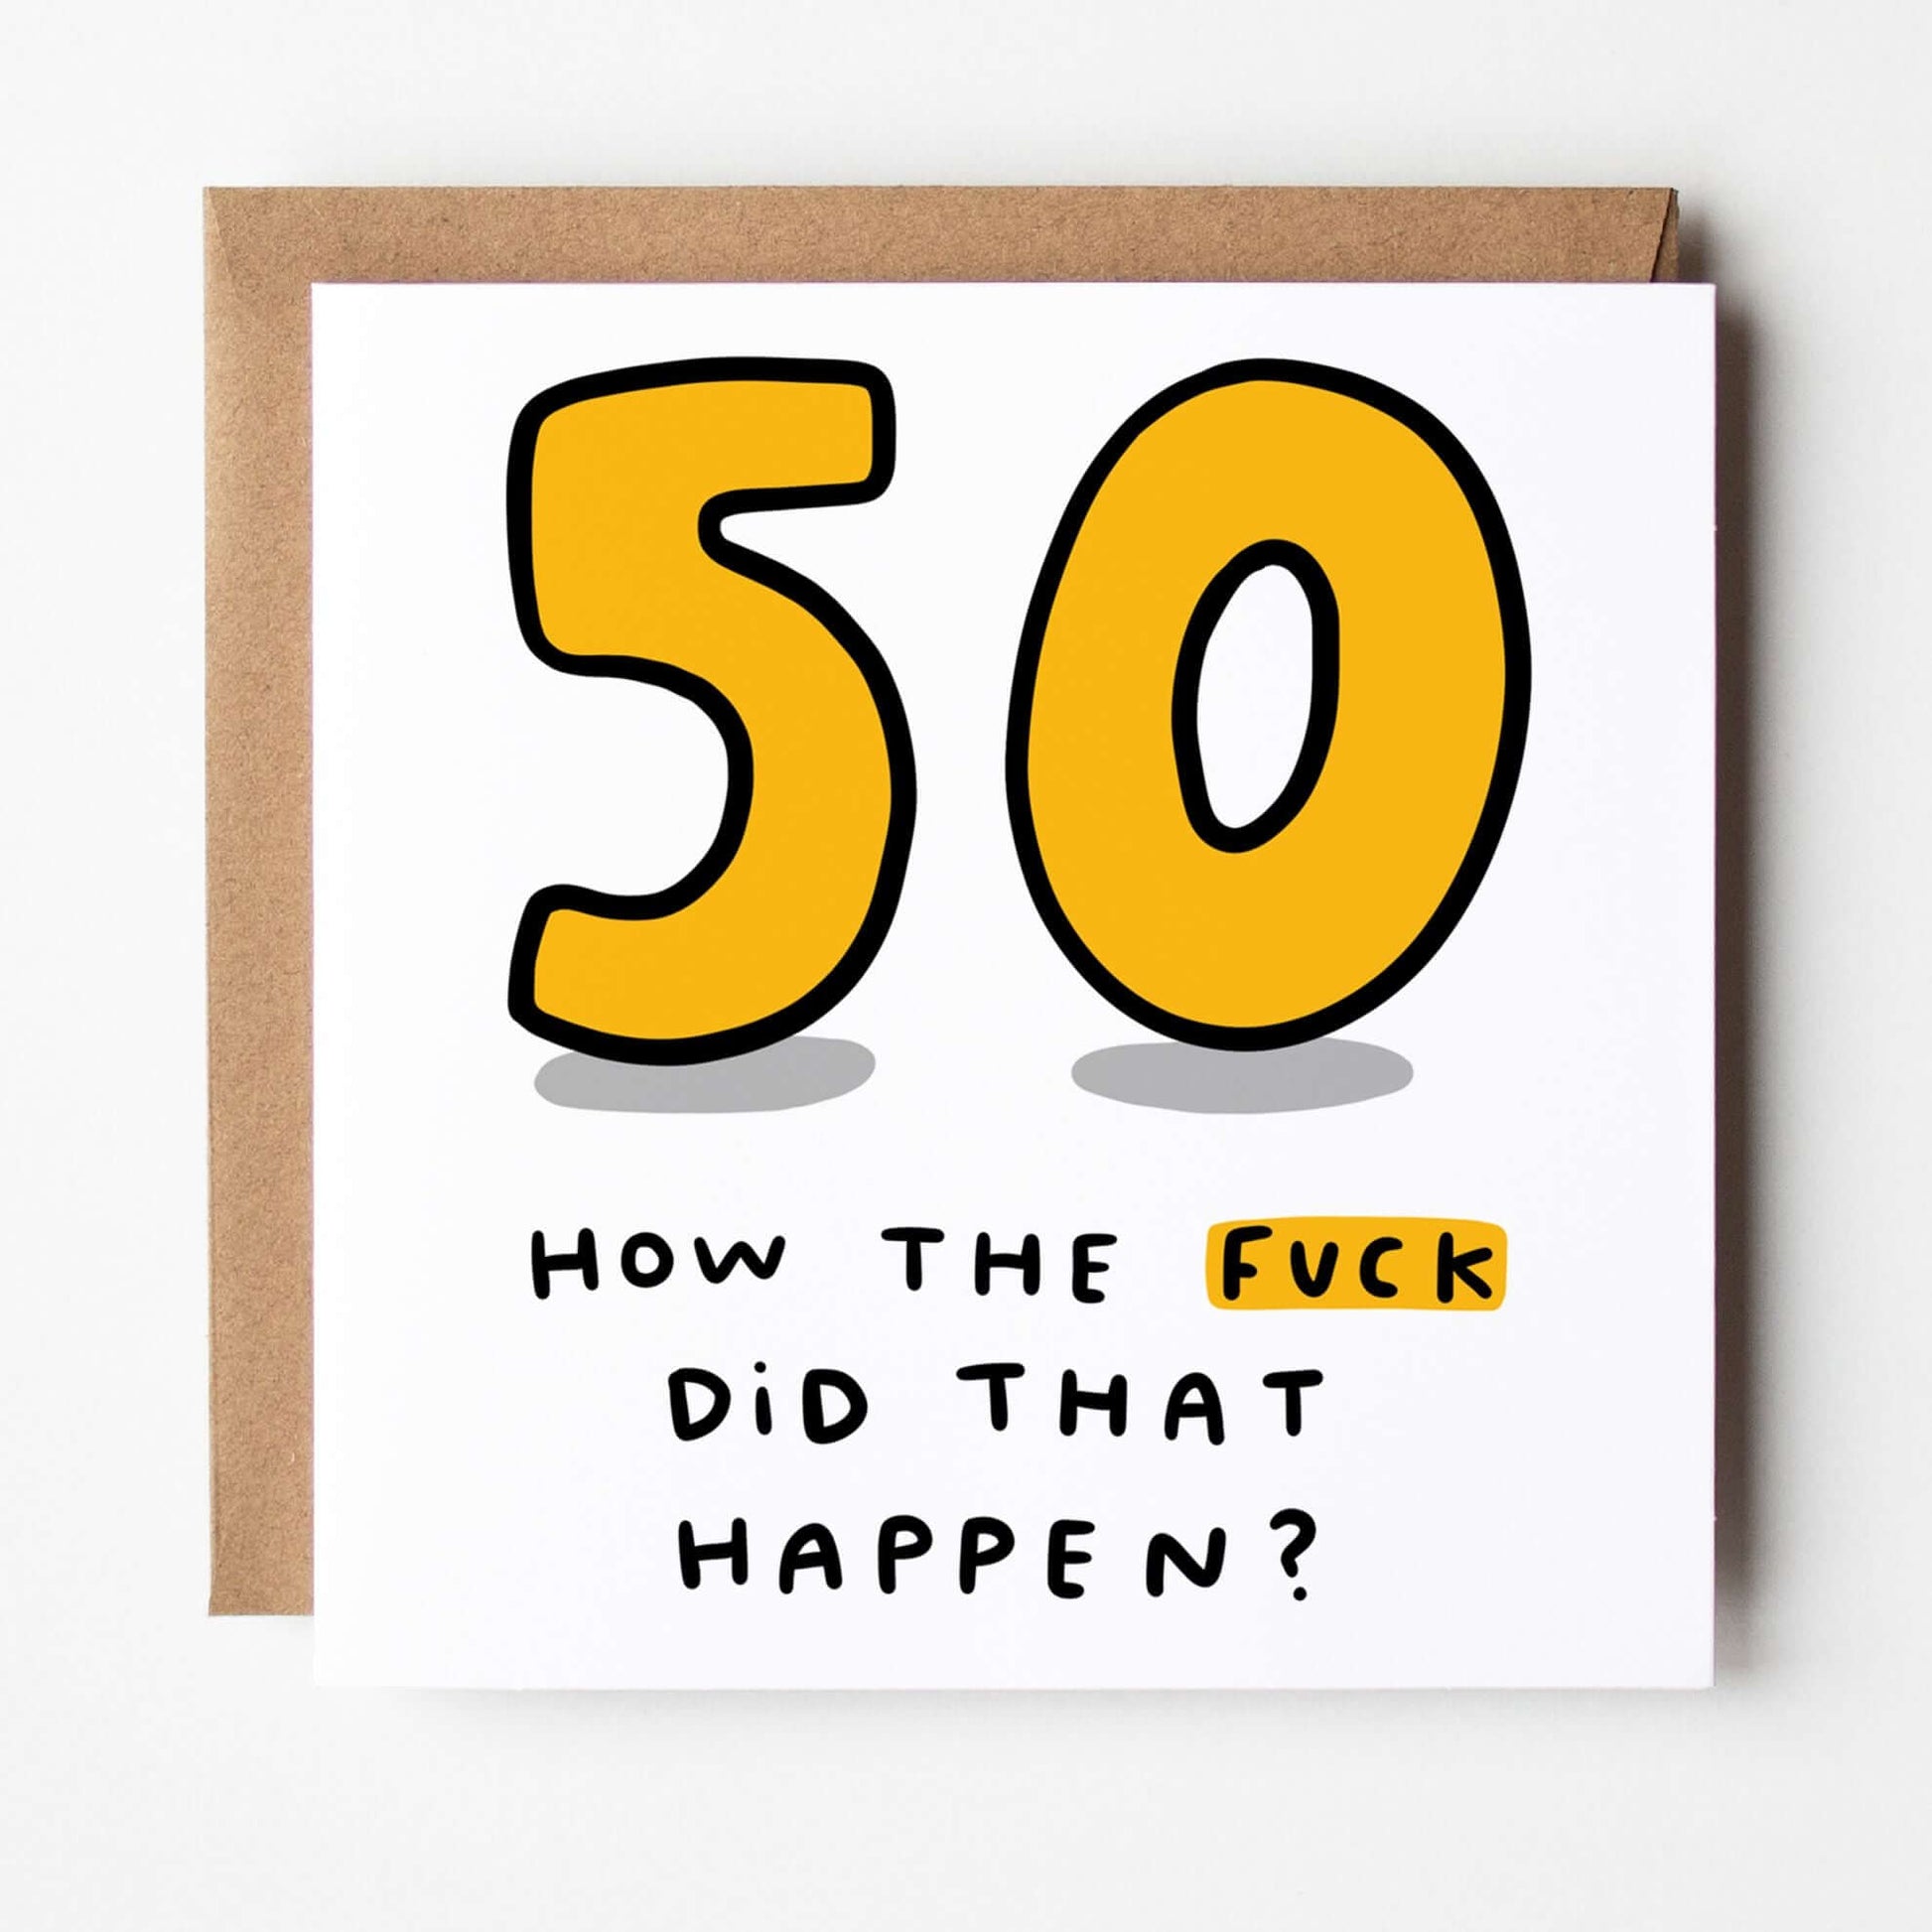 Dandy Sloth 50 How The Fuck Did That Happen 50th Birthday Square Greeting Card Birthday Cards Dandy Sloth